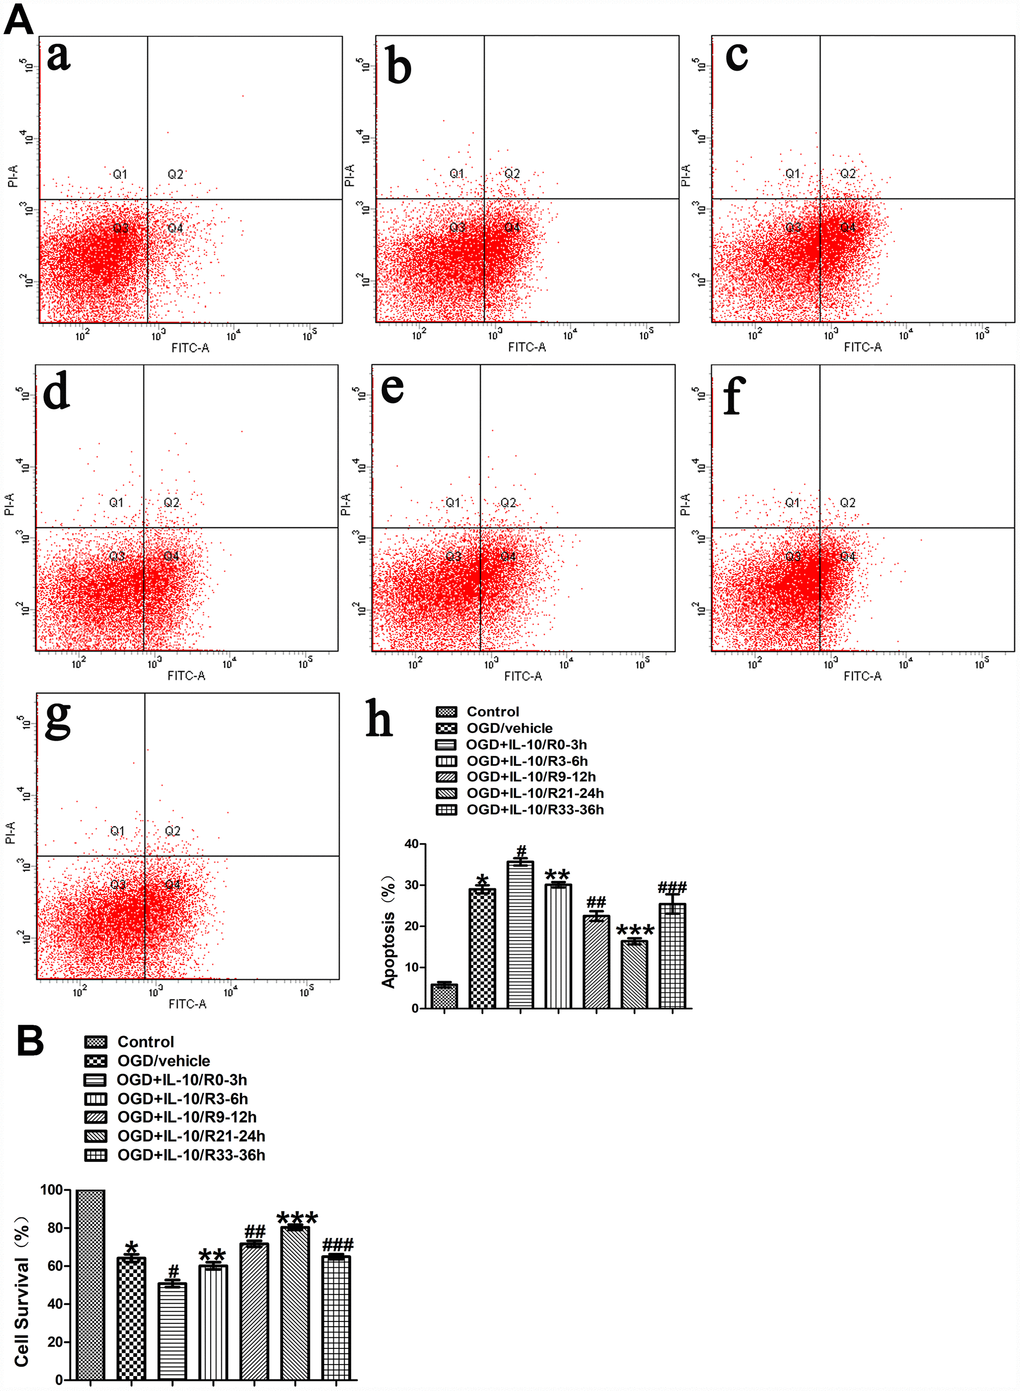 The effect of IL-10 on OGD-induced apoptosis in cultured primary cortical neurons at different time points after OGD injury. (A) Forty-eight hours after OGD, the apoptosis of neurons was detected by flow cytometry. The signals from apoptotic neurons were localized in the Q2 and Q4 quadrants of the resulted dot-plot graph. (a) Control group; (b) OGD group; (c) OGD+IL-10/R0-3h group; (d) OGD+IL-10/R3-6h; (e) OGD+IL-10/R9-12h; (f) OGD+IL-10/R21-24h; (g) OGD+IL-10/R33-36h; (h) Statistical graph of apoptosis in different groups (n=3). *p#pp>0.05, as compared with OGD group; ##pp###p>0.05, as compared with OGD group; by one way analysis of variance (ANOVA) followed by Student-Newman-Keuls multiple comparison test, F=69.591, pB) Forty-eight hours after OGD, survival of neurons was detected by MTT. Statistical graph of cell survival in different groups (n=3). *p#pp>0.05, as compared with OGD group; ##pp###p>0.05, as compared with OGD group; by one way analysis of variance (ANOVA) followed by Student-Newman-Keuls multiple comparison test, F=102.550, p